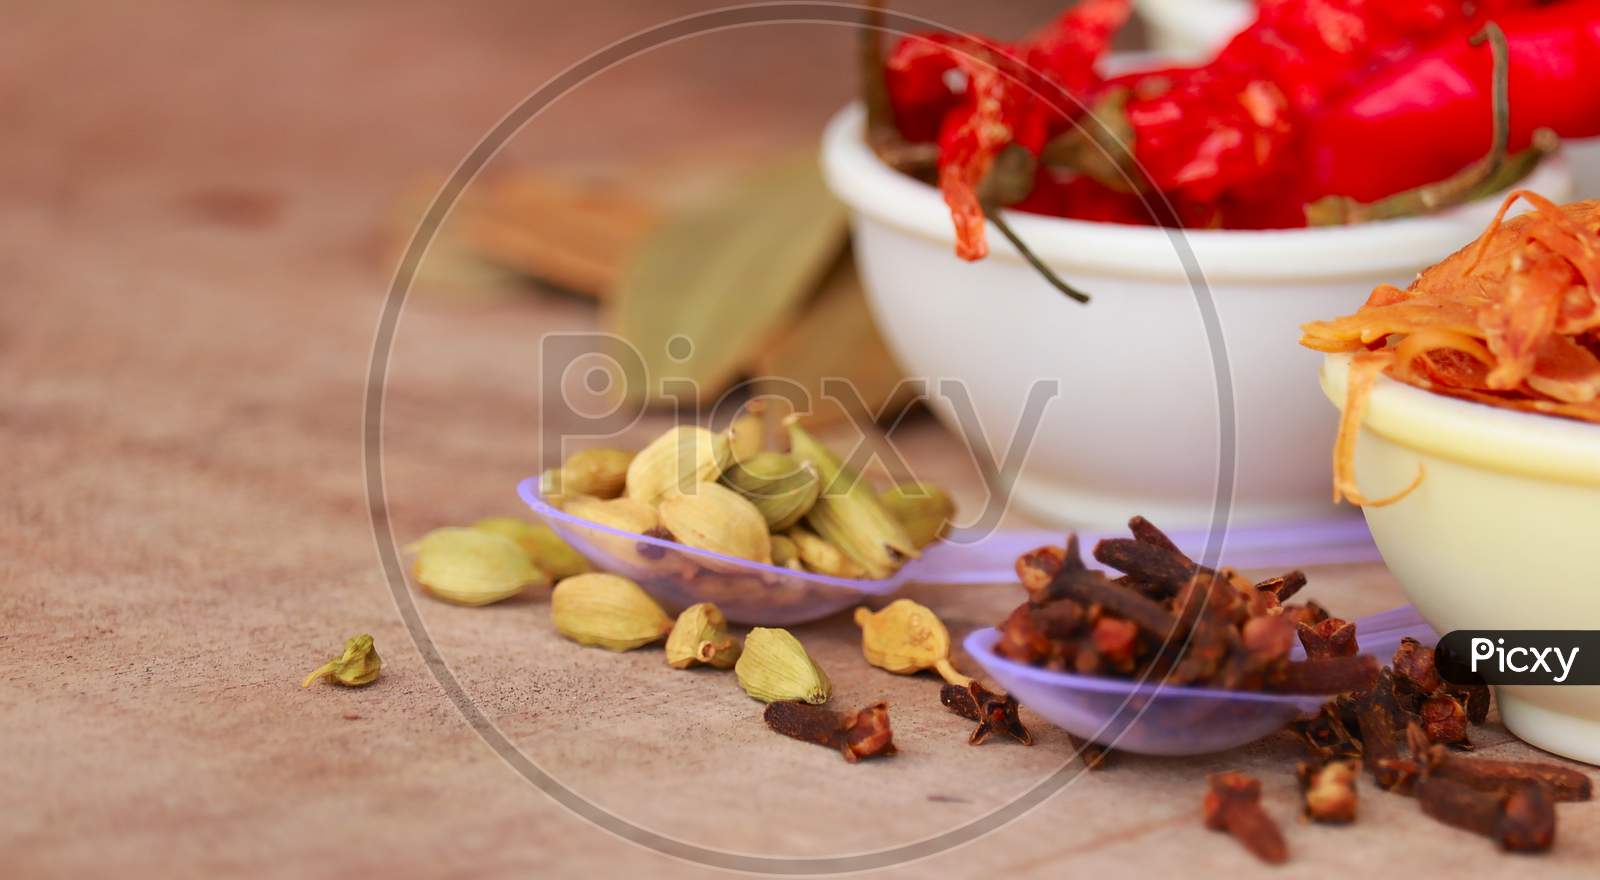 Variety Of Spices And Herbs On Kitchen Table,Cooking Ingredients,Spices And Seasonings For Cooking,Neroli,Nutmeg, Cinnamon, Cloves, Anise,Cardamom